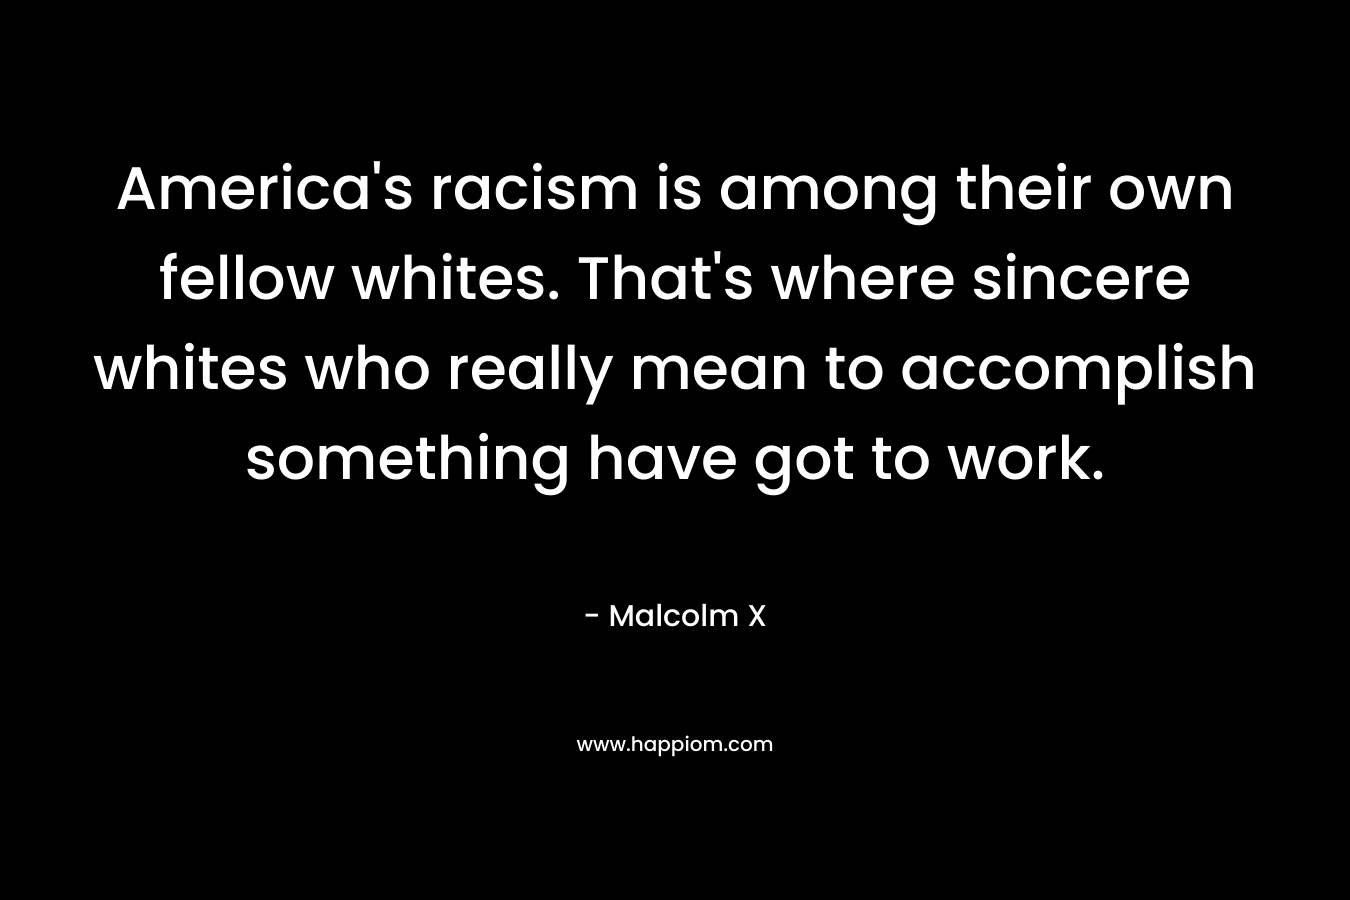 America’s racism is among their own fellow whites. That’s where sincere whites who really mean to accomplish something have got to work. – Malcolm X